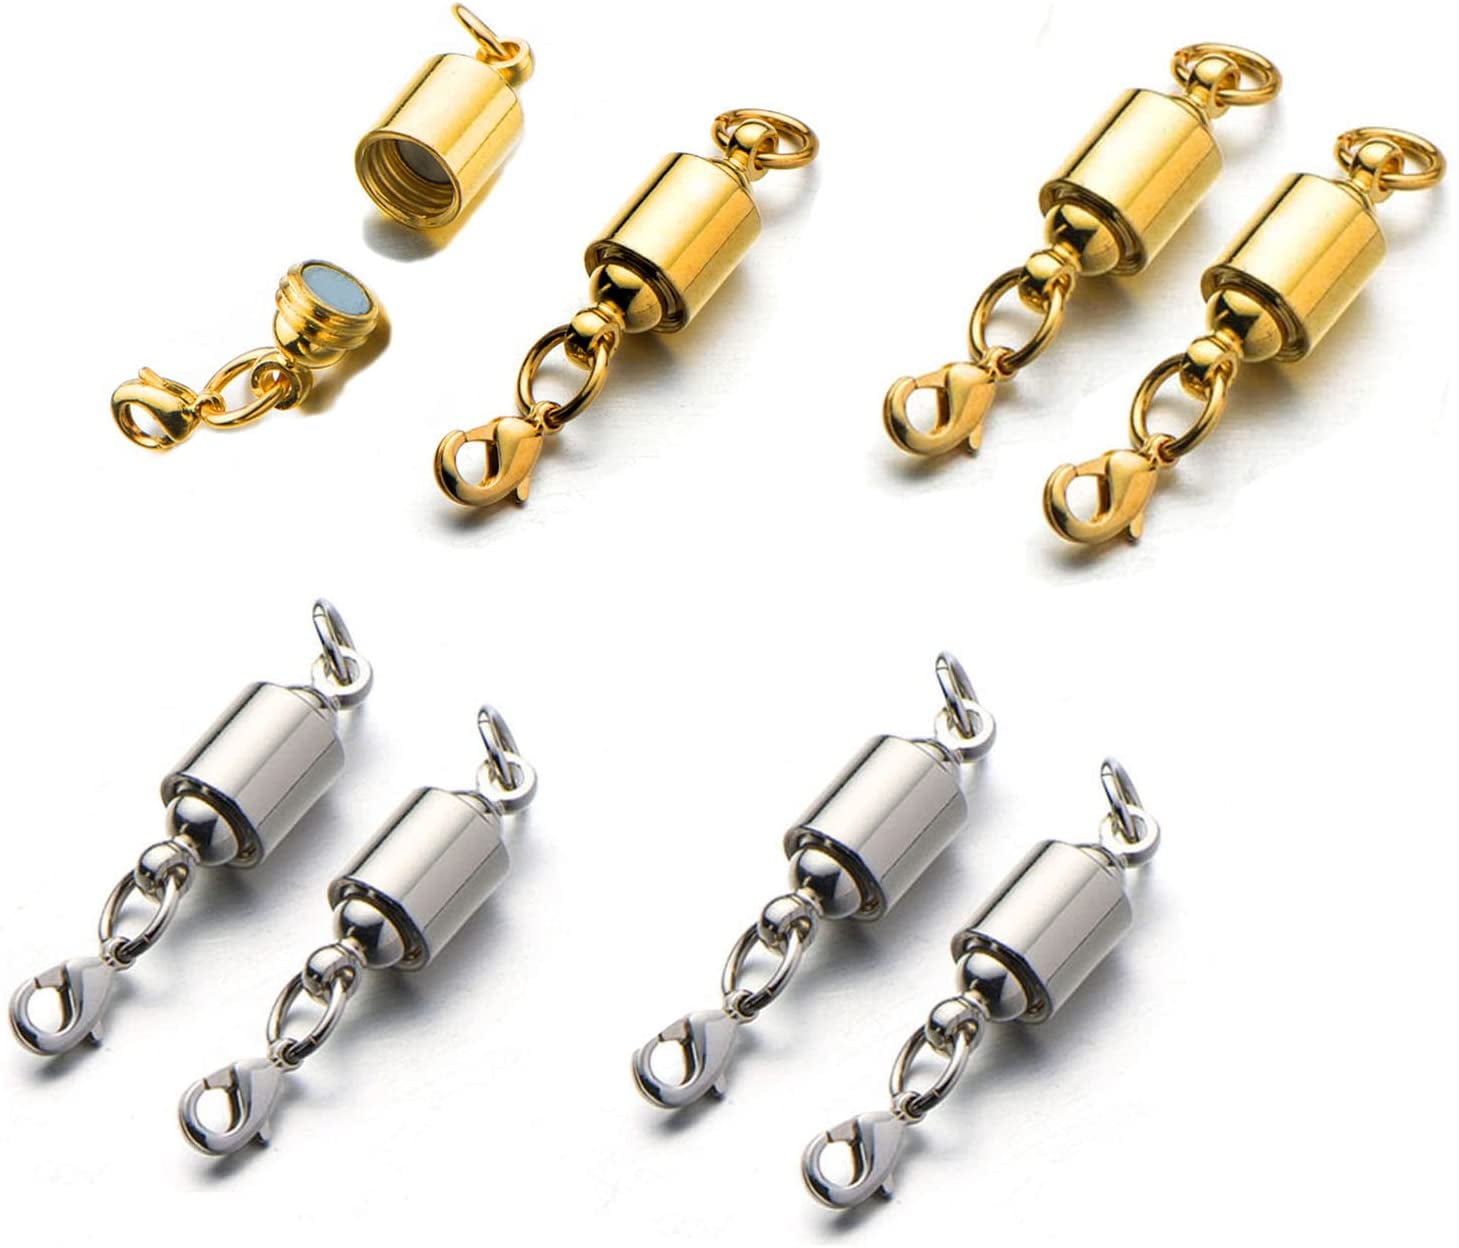 20pcs Gold & Silver Plated Jewelry Diy Screw Clasps buckle Necklace Connectors 